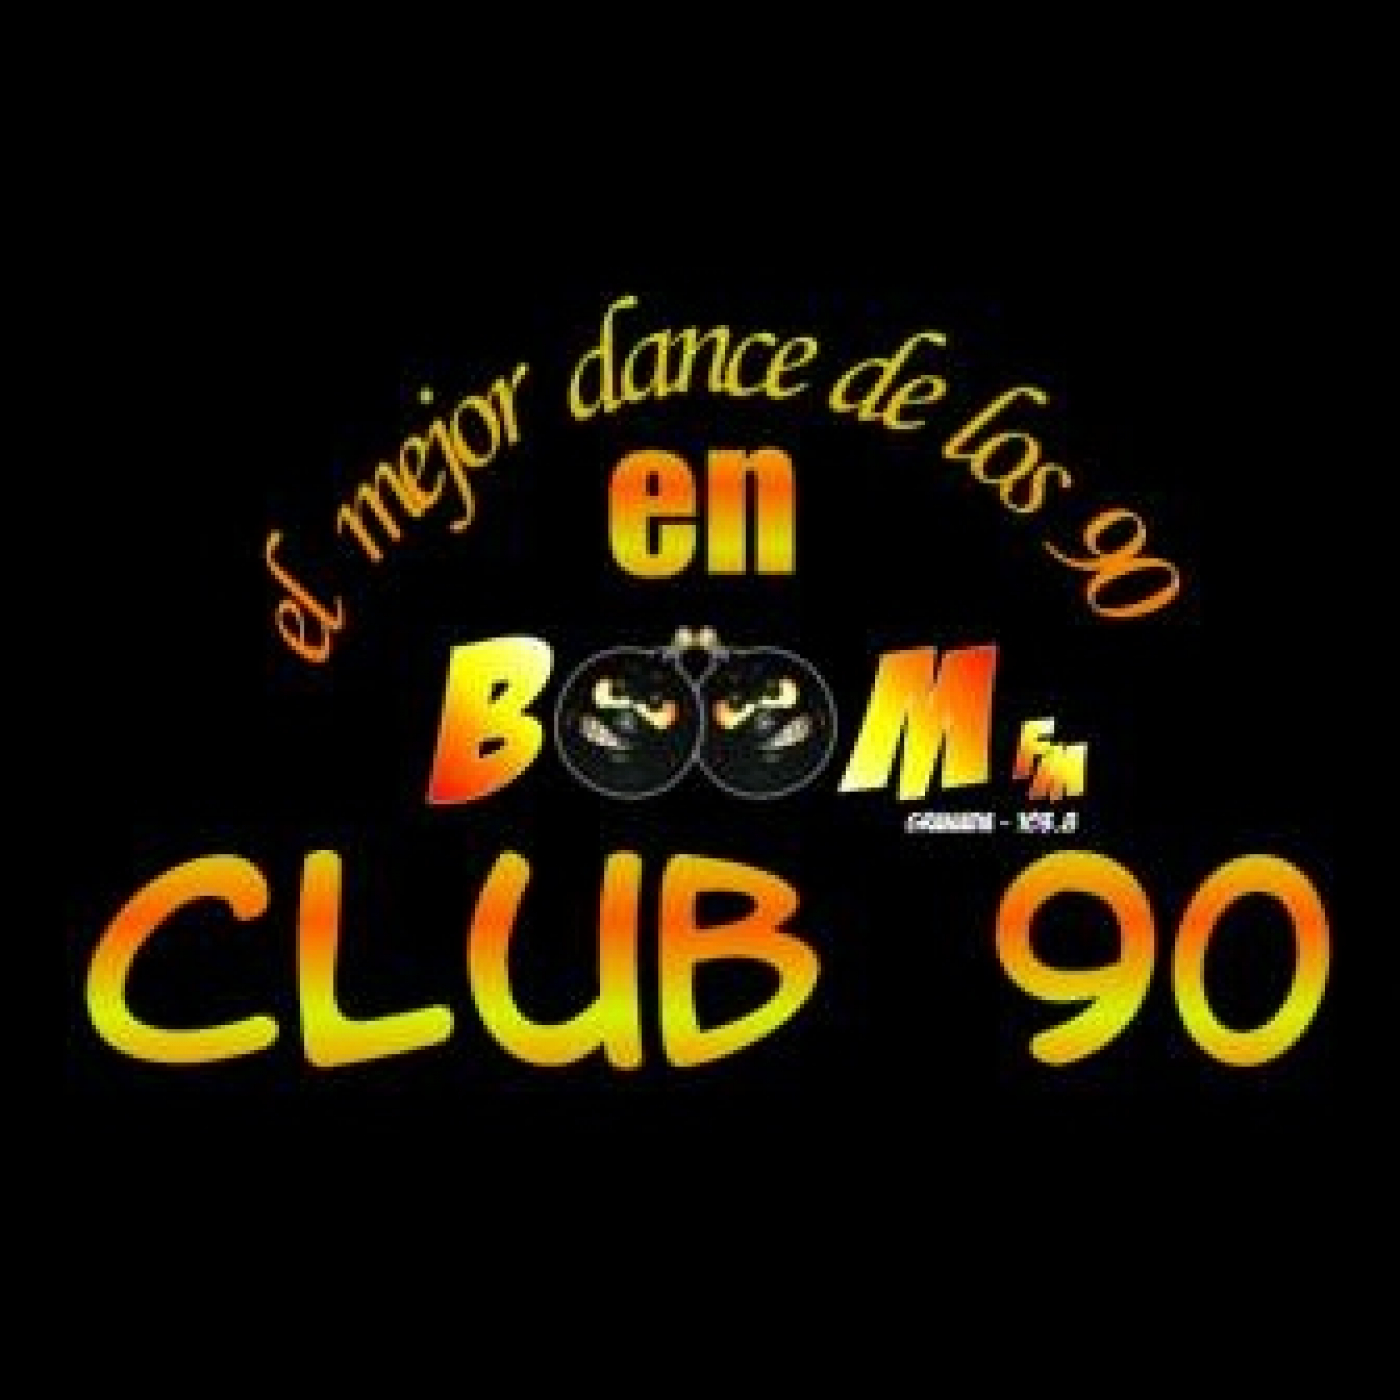 Club 90 (390 IN THE MIX)